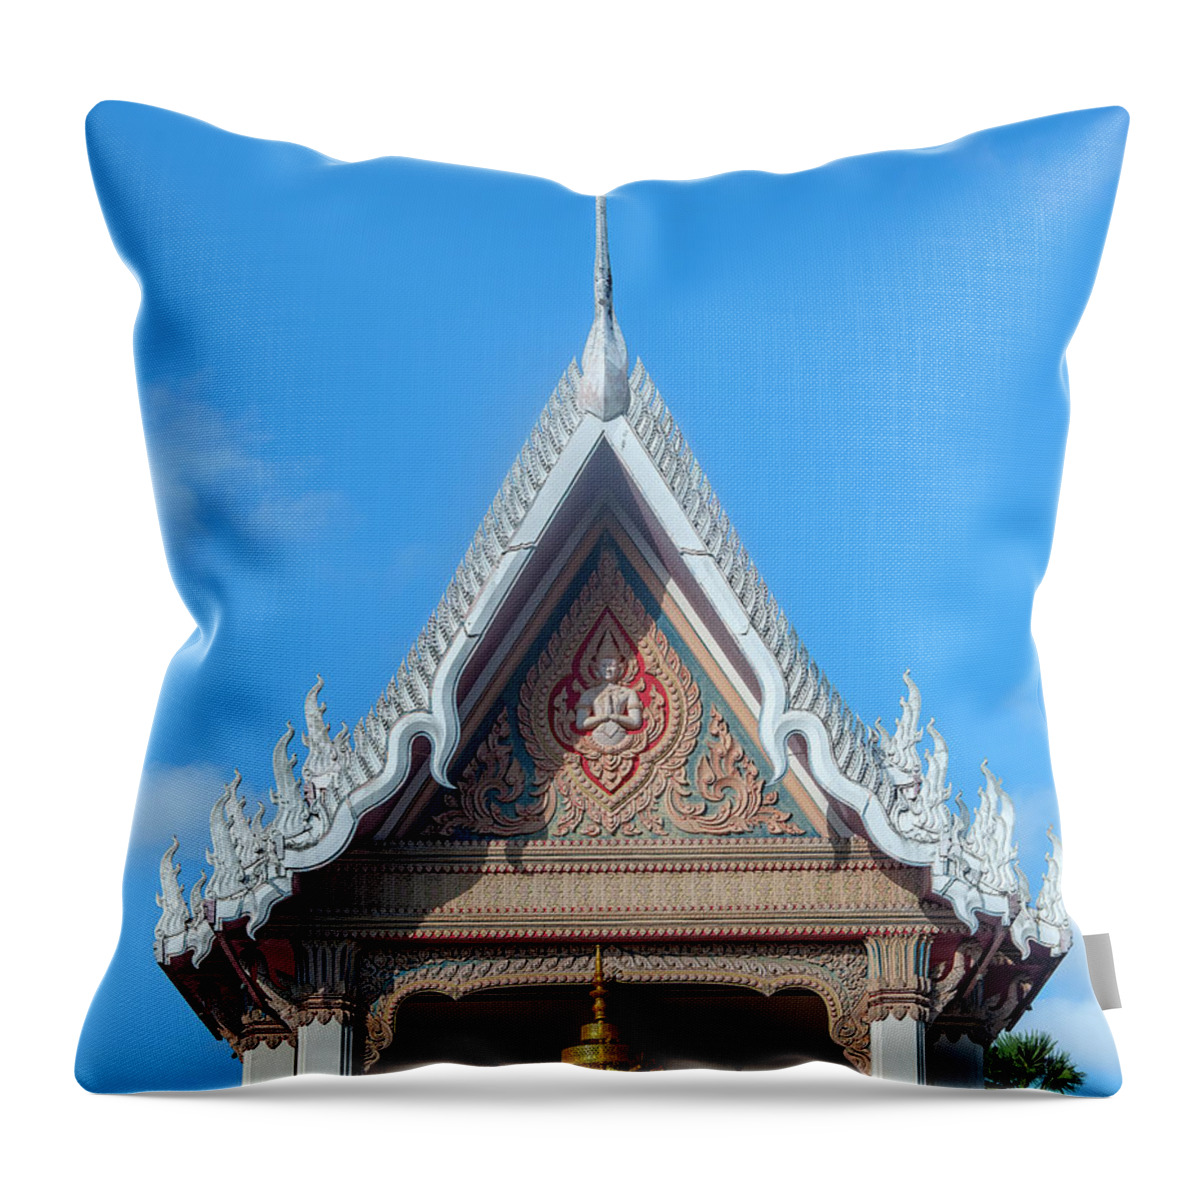 Scenic Throw Pillow featuring the photograph Wat Suttha Chinda Phra Ubosot Gable DTHNR0356 by Gerry Gantt